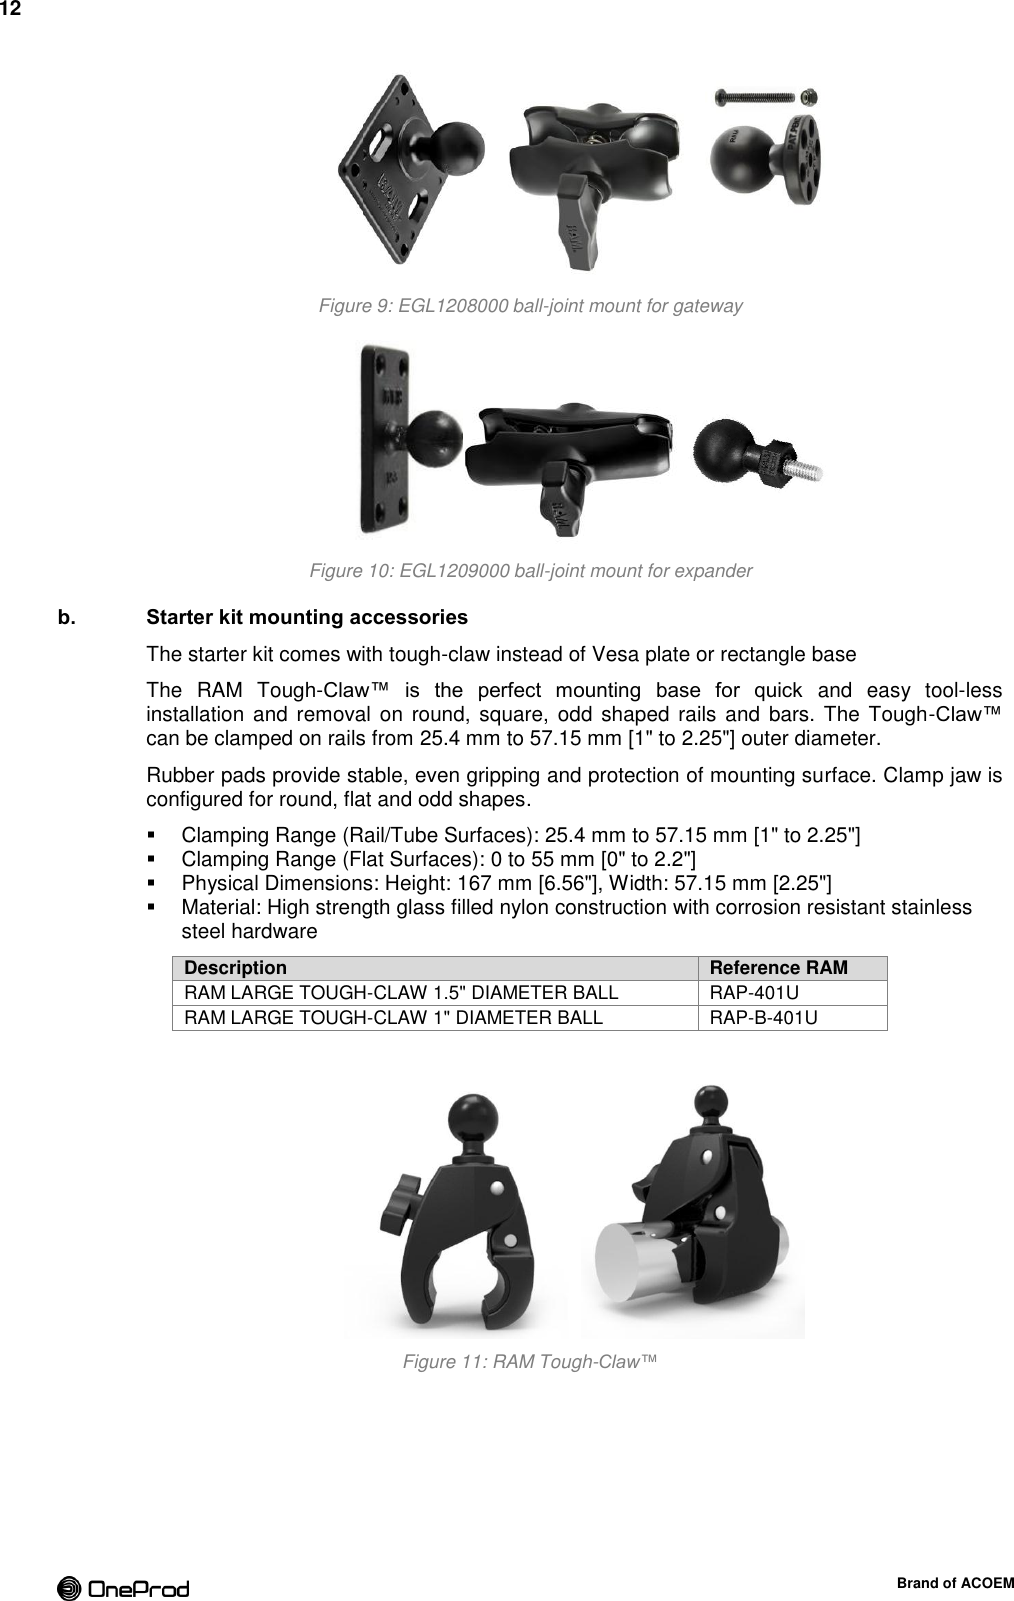 12  Brand of ACOEM  Figure 9: EGL1208000 ball-joint mount for gateway  Figure 10: EGL1209000 ball-joint mount for expander b. Starter kit mounting accessories The starter kit comes with tough-claw instead of Vesa plate or rectangle base The  RAM  Tough-Claw™  is  the  perfect  mounting  base  for  quick  and  easy  tool-less installation and  removal  on round, square, odd shaped rails and  bars. The Tough-Claw™ can be clamped on rails from 25.4 mm to 57.15 mm [1&quot; to 2.25&quot;] outer diameter. Rubber pads provide stable, even gripping and protection of mounting surface. Clamp jaw is configured for round, flat and odd shapes.   Clamping Range (Rail/Tube Surfaces): 25.4 mm to 57.15 mm [1&quot; to 2.25&quot;]   Clamping Range (Flat Surfaces): 0 to 55 mm [0&quot; to 2.2&quot;]   Physical Dimensions: Height: 167 mm [6.56&quot;], Width: 57.15 mm [2.25&quot;]   Material: High strength glass filled nylon construction with corrosion resistant stainless steel hardware Description Reference RAM RAM LARGE TOUGH-CLAW 1.5&quot; DIAMETER BALL RAP-401U RAM LARGE TOUGH-CLAW 1&quot; DIAMETER BALL RAP-B-401U   Figure 11: RAM Tough-Claw™  